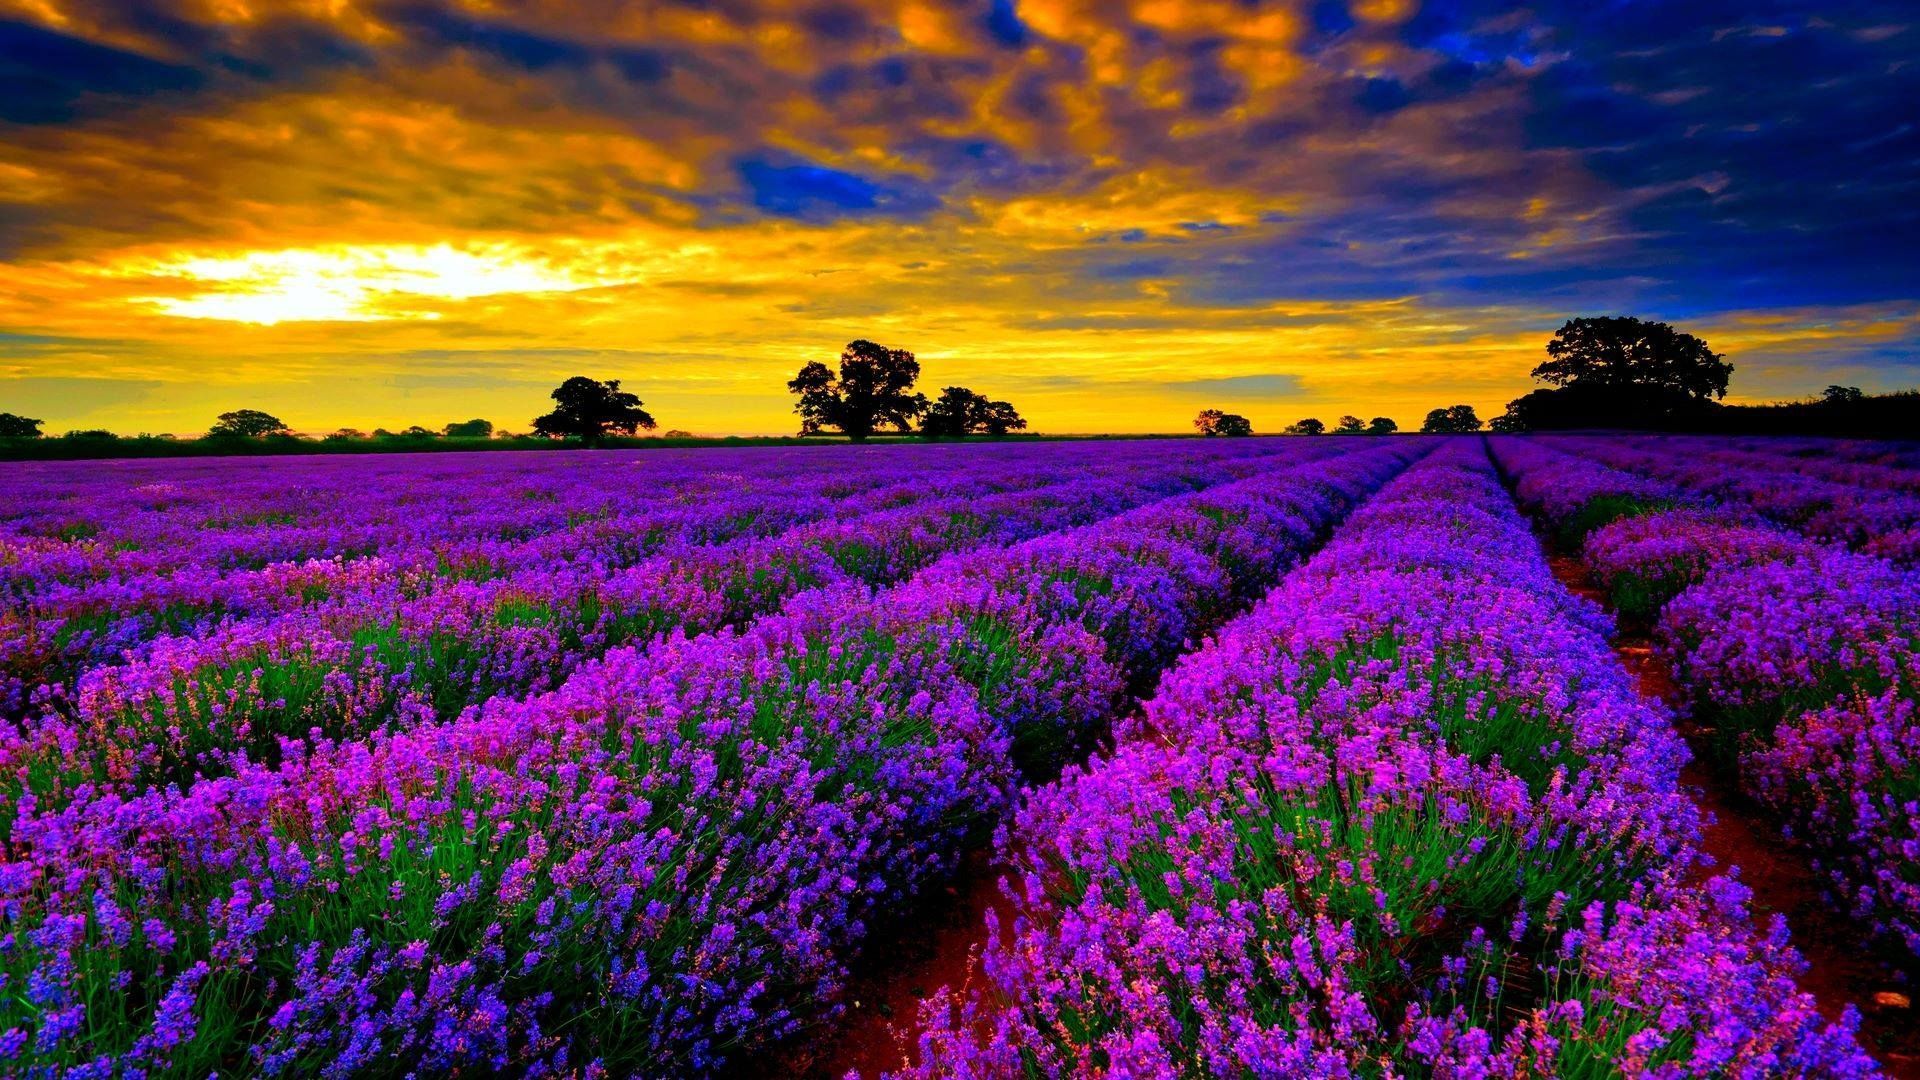 1920x1080 Lavender Fields In France Wallpaper Download At